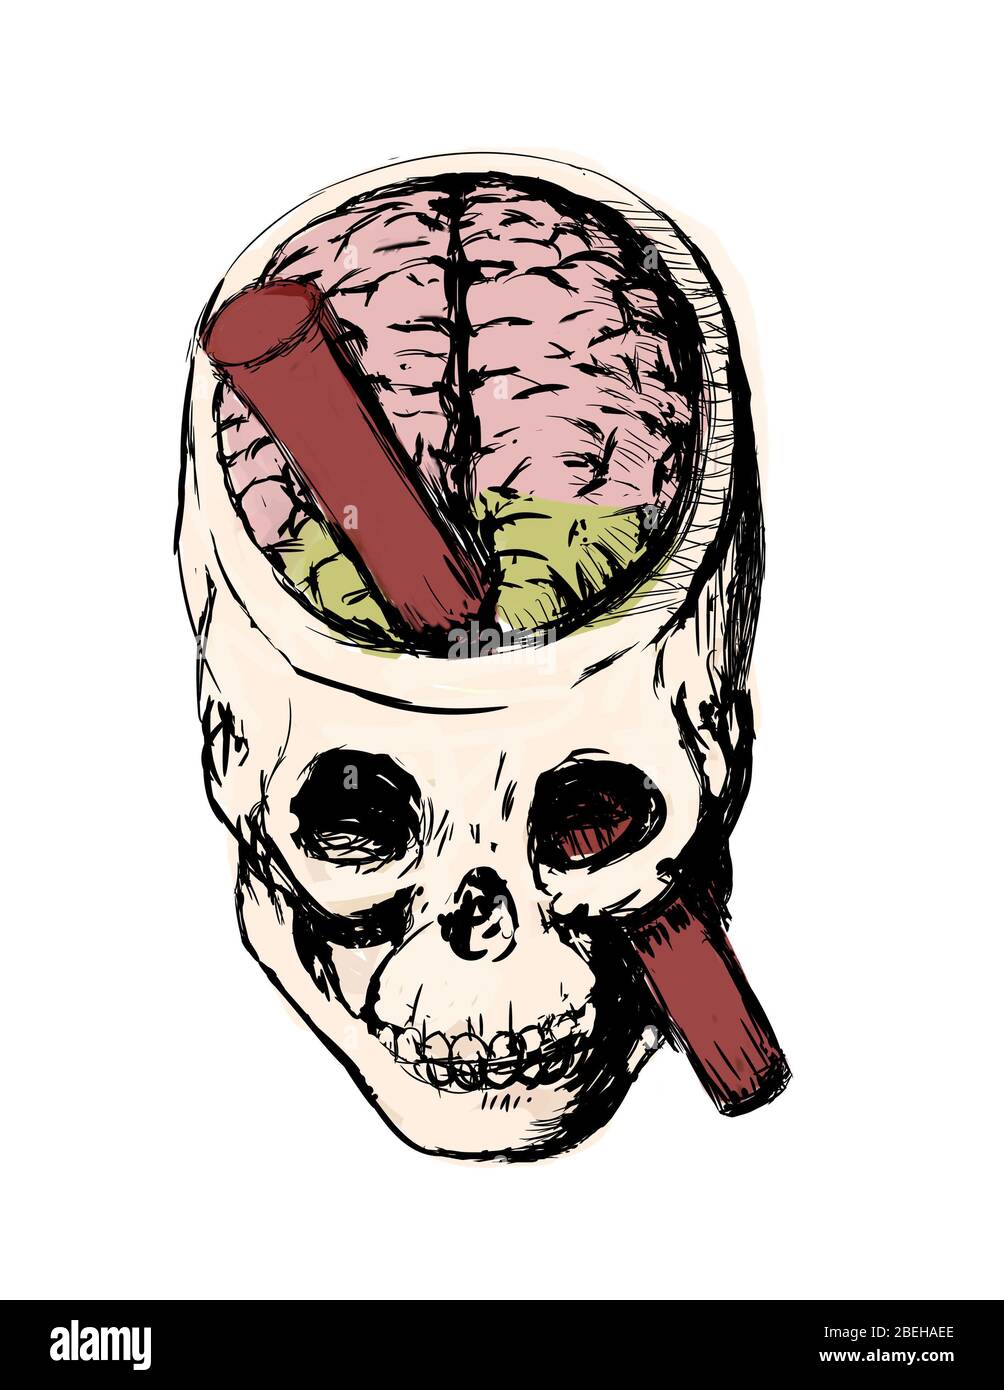 An illustration of the brain injury of Phineas Gage. Phineas P. Gage, 1823-1860, was an American railroad worker who survived an accident in 1848 in which a large iron rod was driven through his head. The iron rod destroyed most of his left frontal lobe. The effects of the injury on his personality have been much debated as there is scant written evidence of what his behavior actually was for the twelve remaining years of his life. Stock Photo